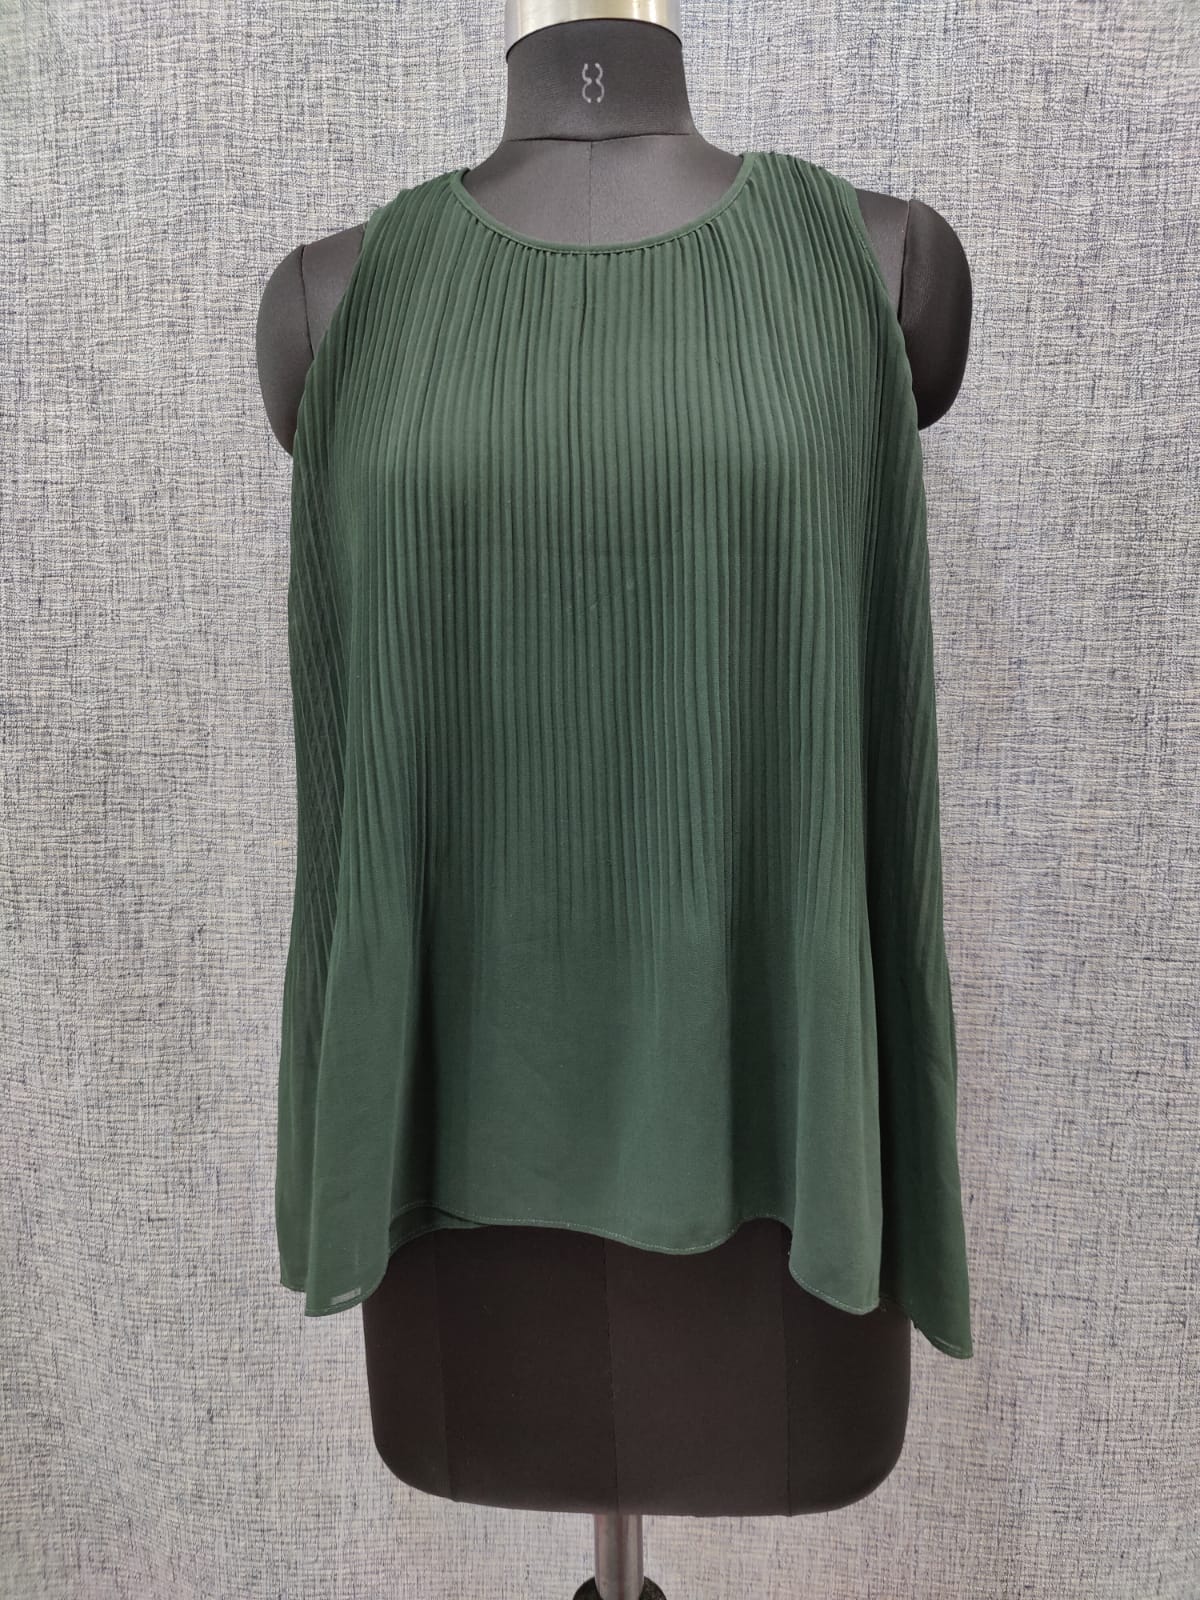 ZARA Forest Green Pleated Sleeveless Top | Relove